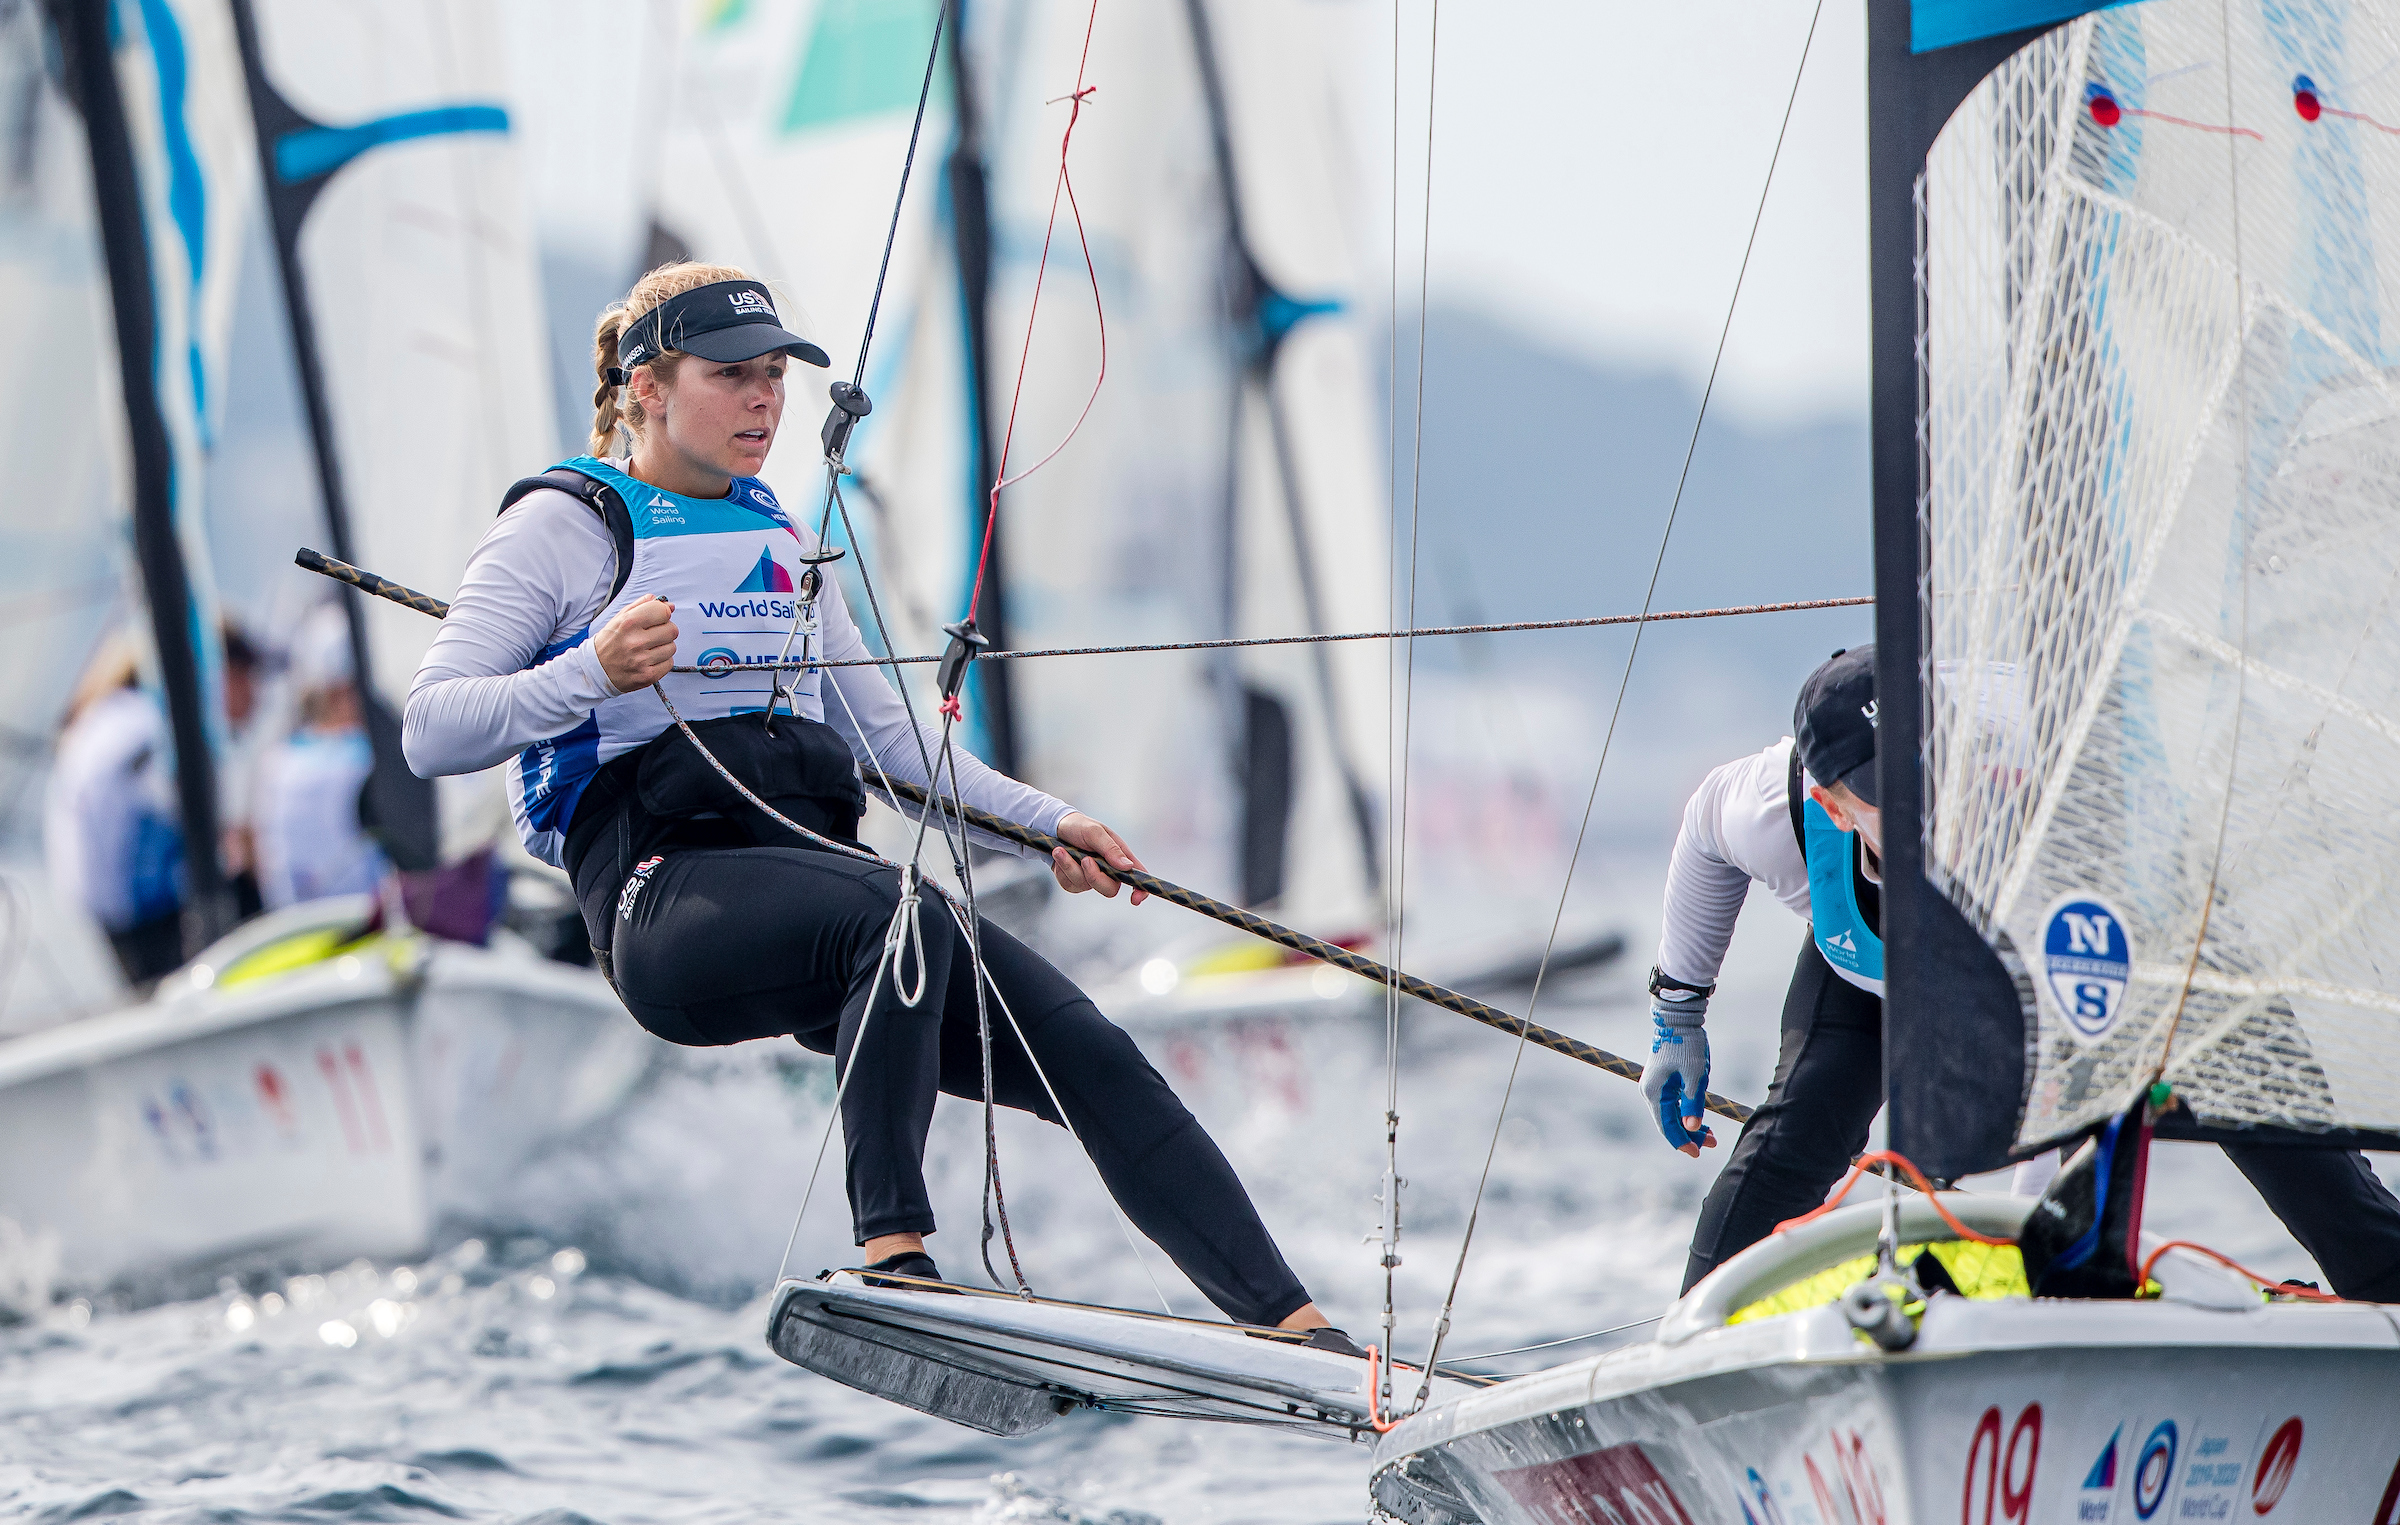 ‘Feeling of freedom’: Wisconsin sailor Stephanie Roble to make second Olympic appearance